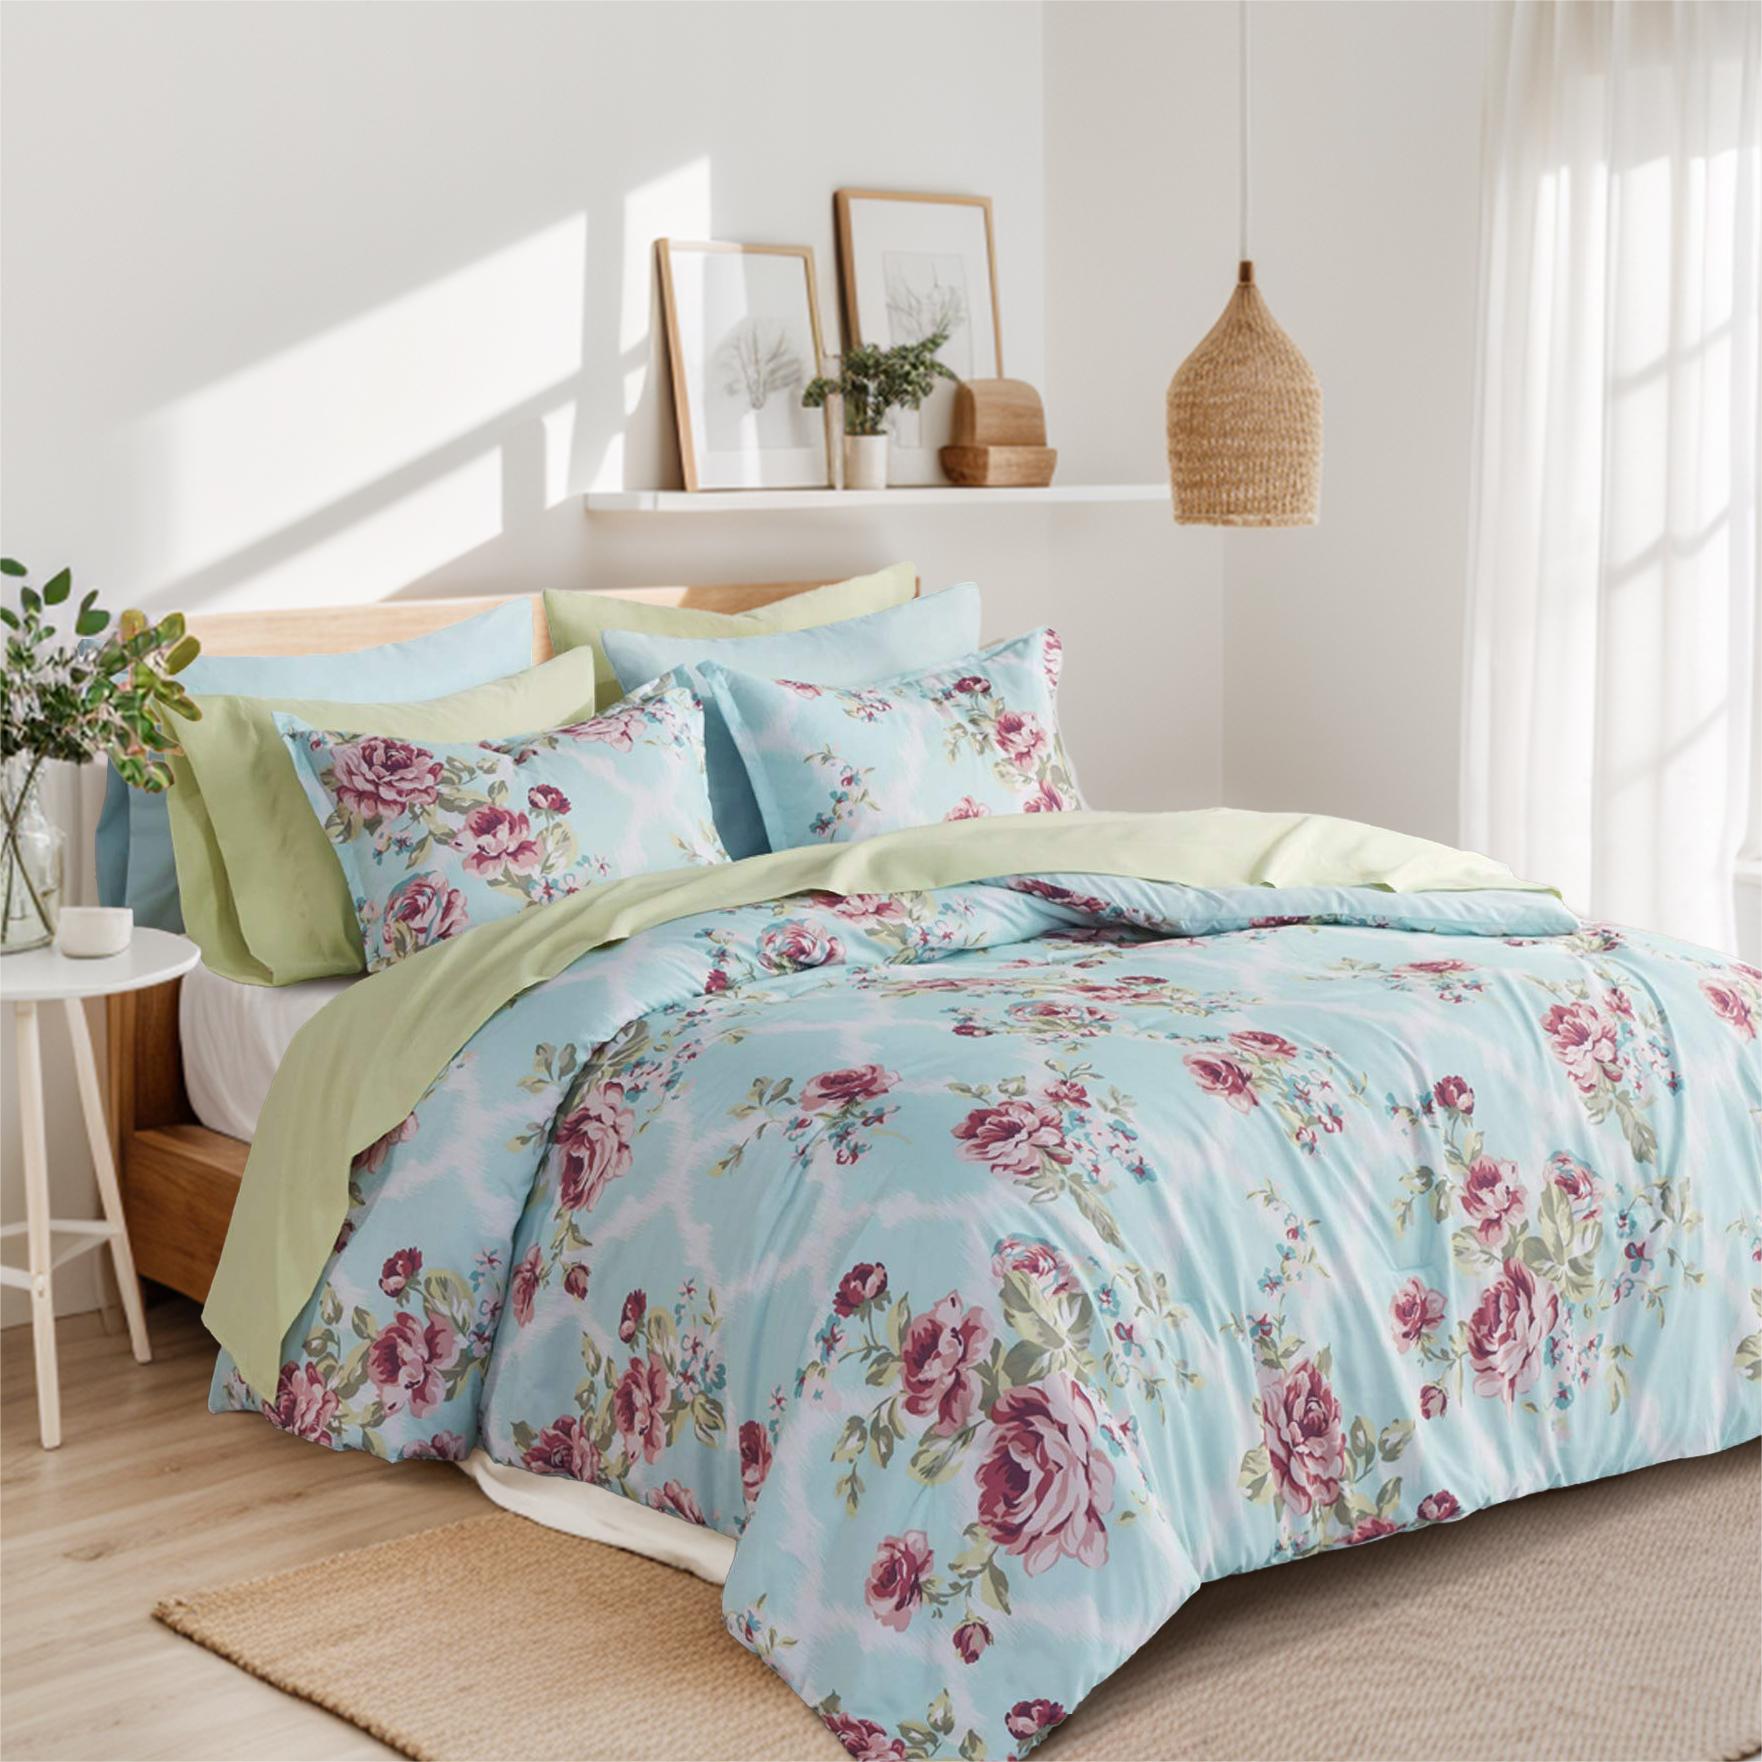 Comfort Spaces 9-Piece Floral Queen Size Bed in a Bag Comforter Bedding Sets with Sheets and Side Pockets , Blue/Red - image 1 of 12